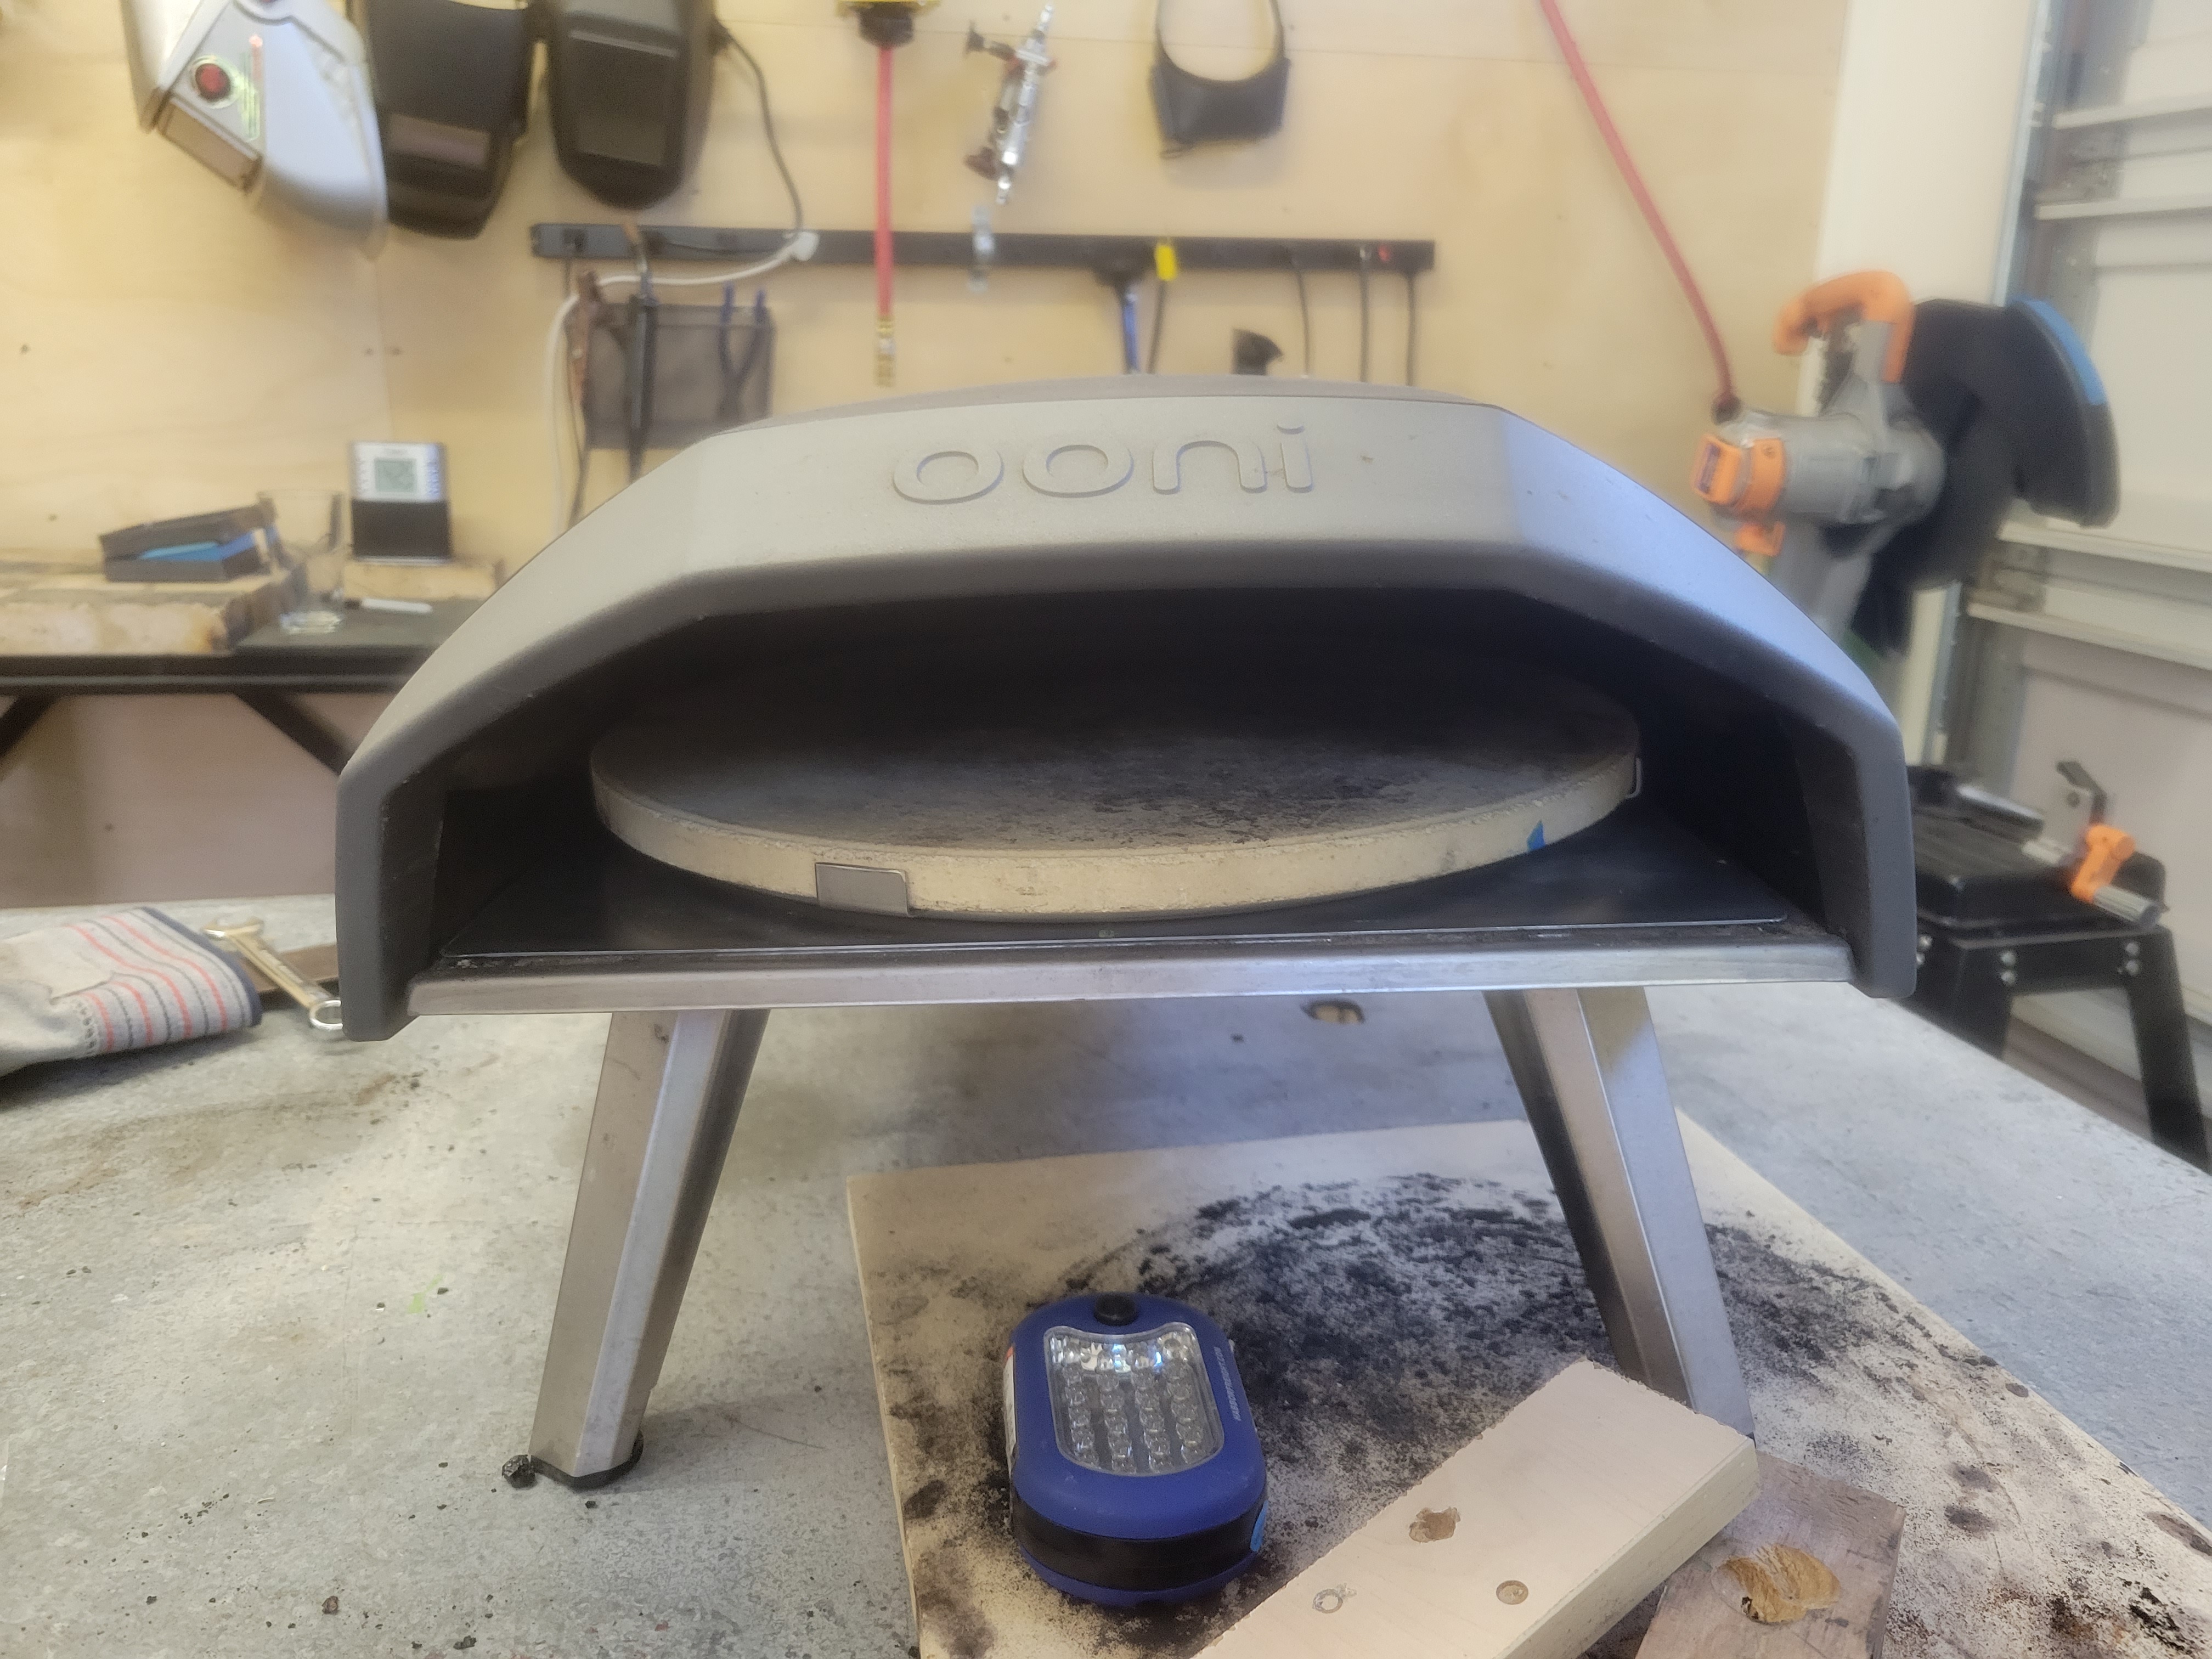 pizza oven with homemade turntable in it, in a metal shop